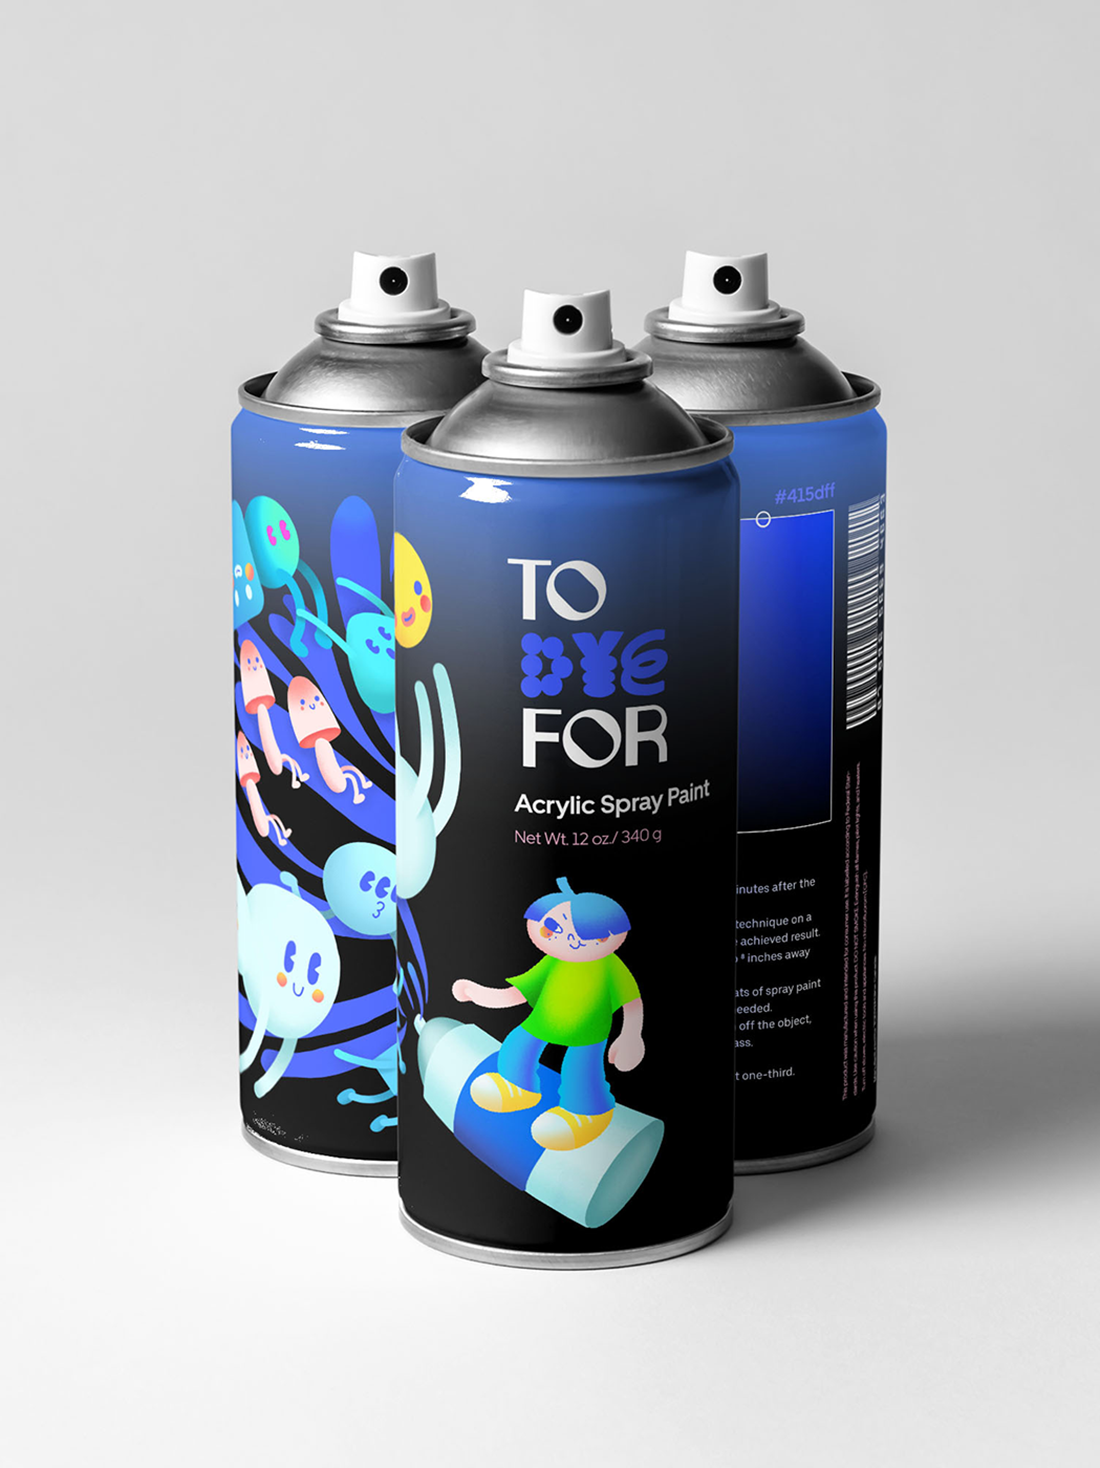 Paint Brand: To Dye For - Image 2